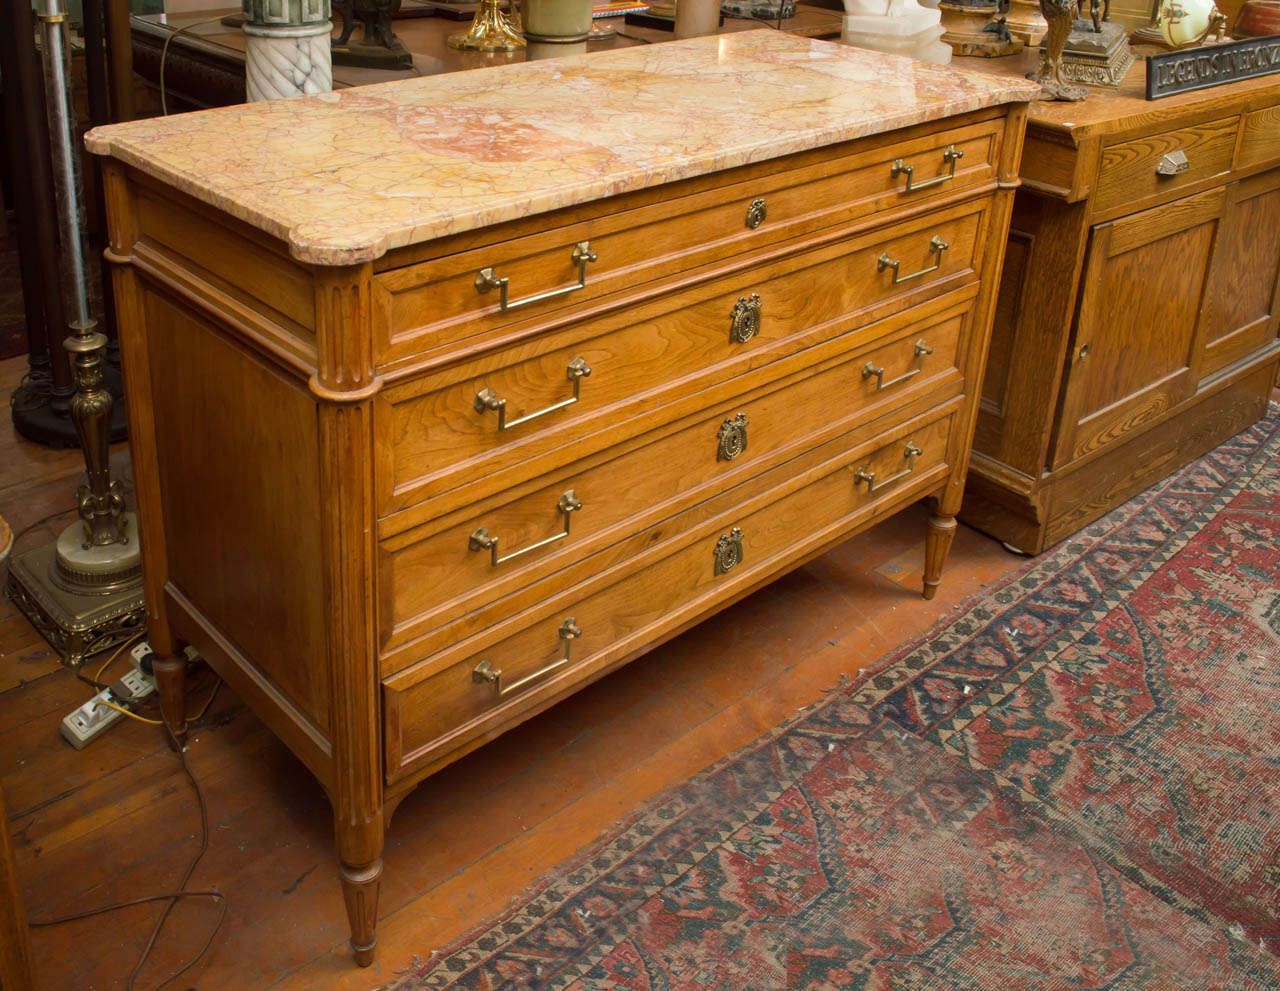 This very high quality French bureau has some of the nicest grain and colored marble you will find on a piece of furniture.  The marble is original and has no repairs.  The chest of drawers is made of walnut and has all the original brass handles